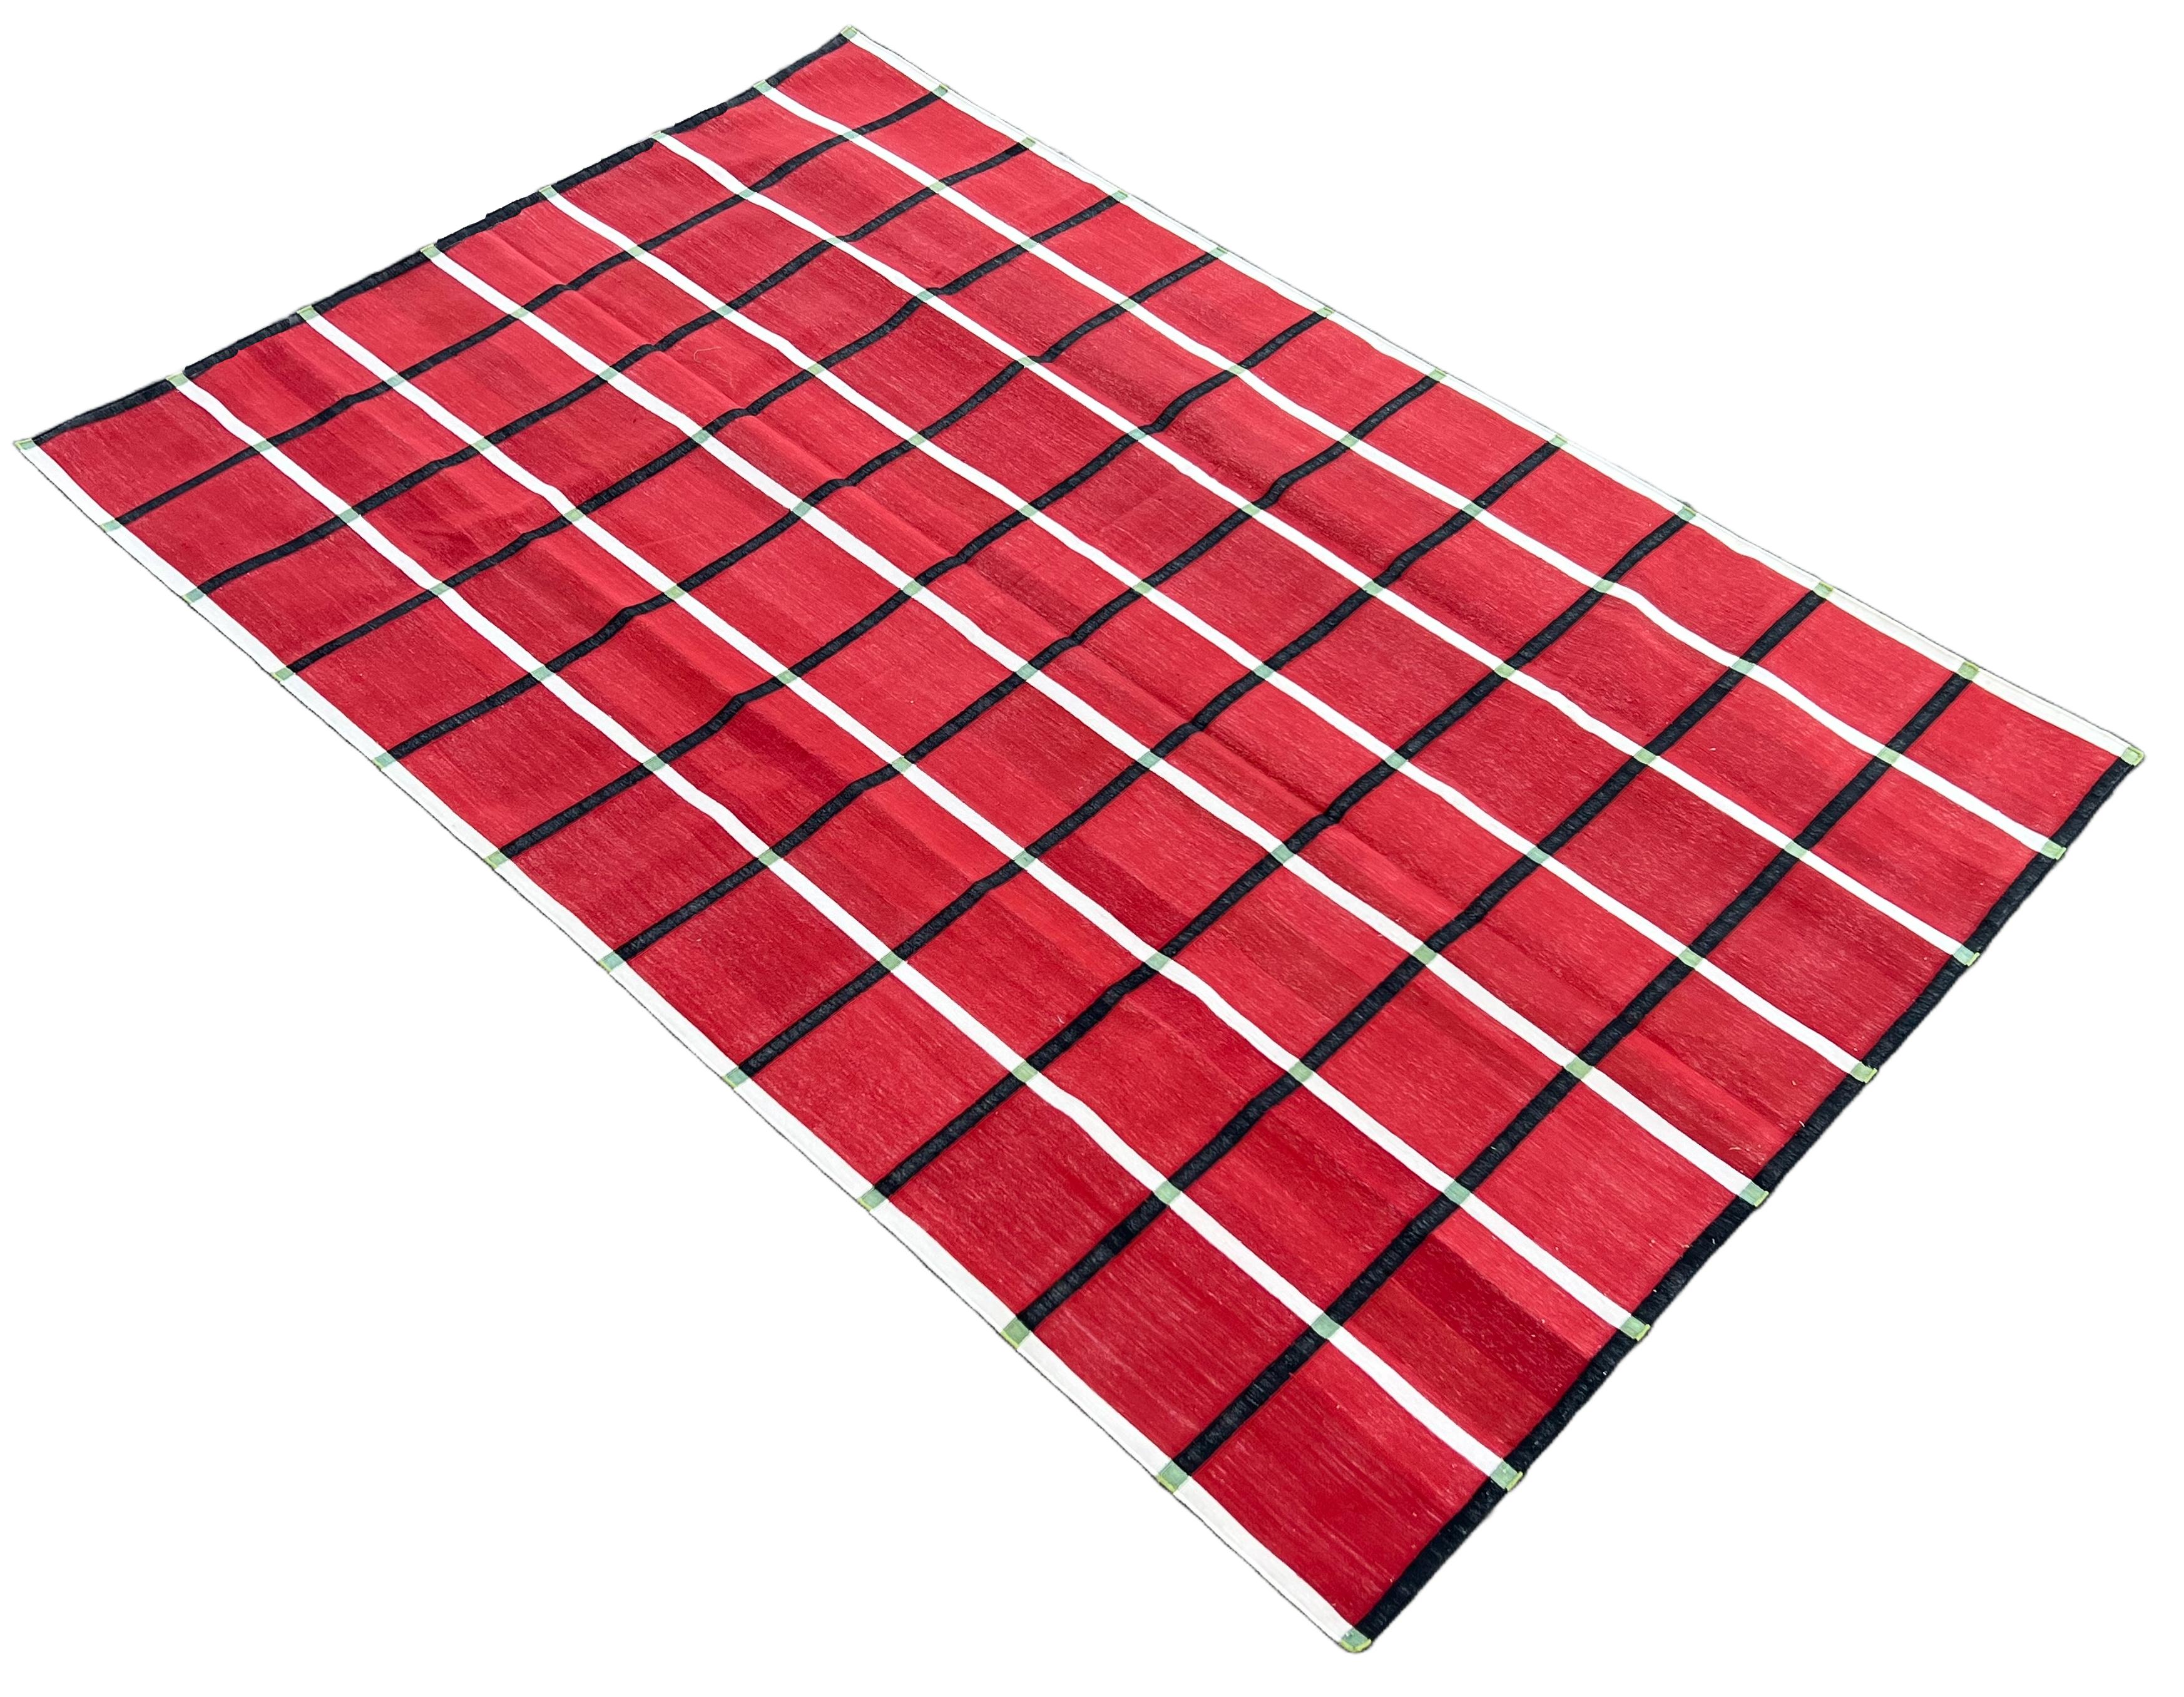 Cotton Vegetable Dyed Area Rug, Red, Black And Cream Windowpane Checked Indian Rug-6'x9'
These special flat-weave dhurries are hand-woven with 15 ply 100% cotton yarn. Due to the special manufacturing techniques used to create our rugs, the size and